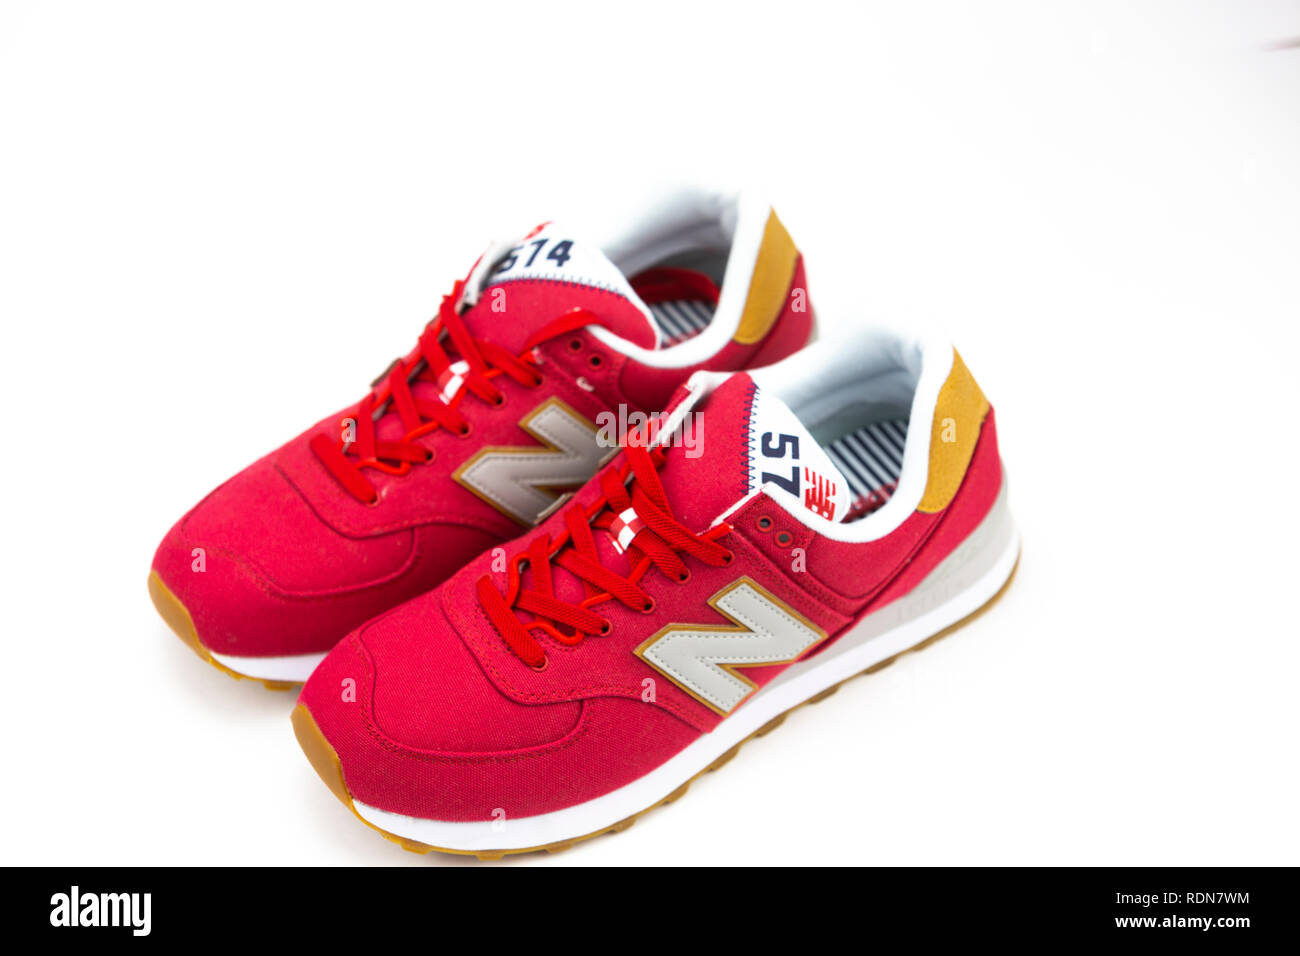 New Balance NB 574 Red athletic shoes 